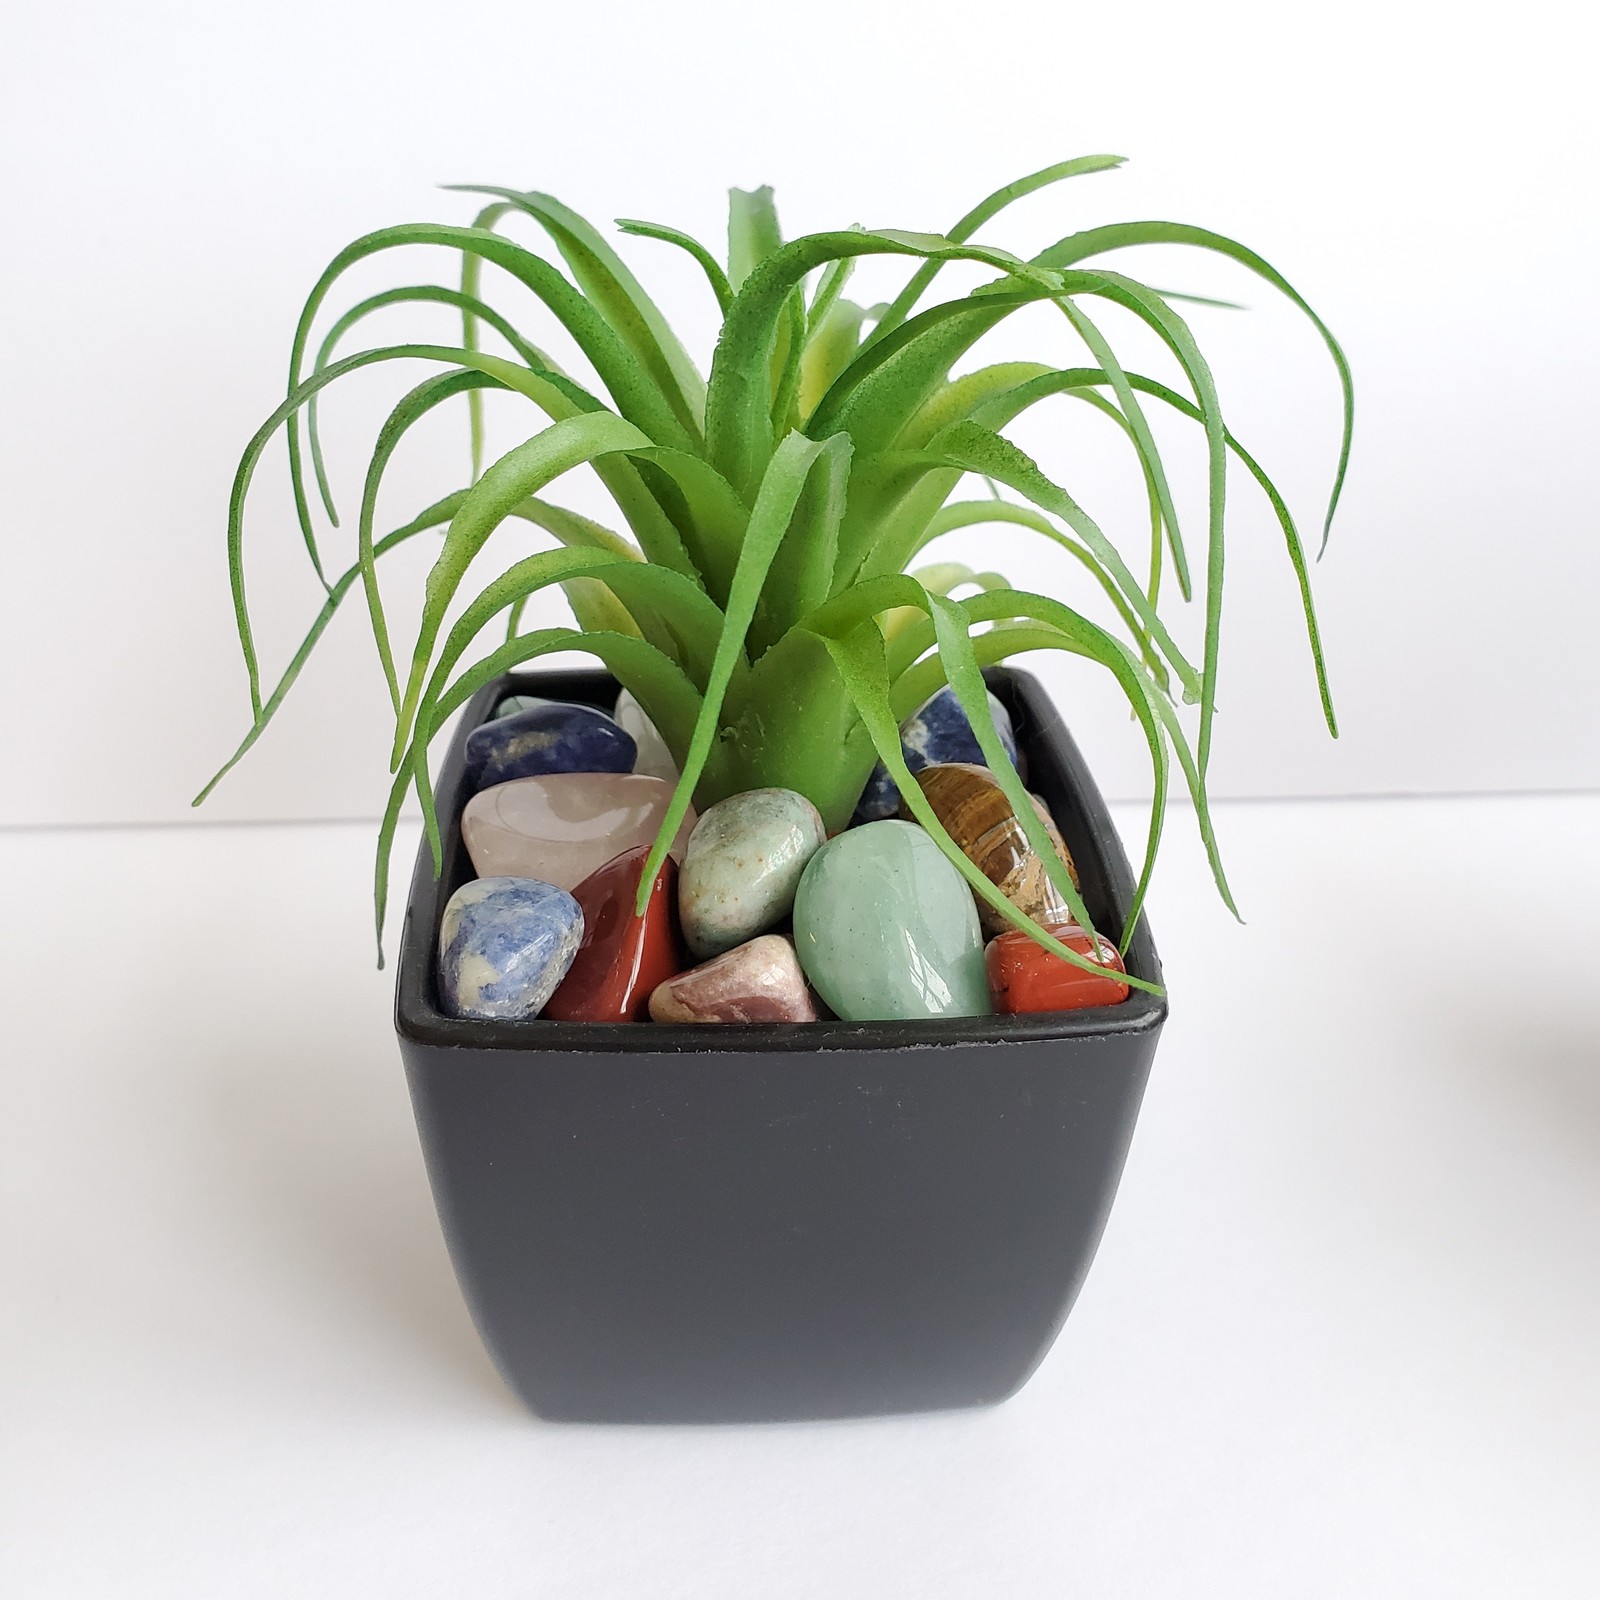 Faux Air Plant with Natural Polished Stones in Planter, Tumbled Rocks, Airplant - $14.99